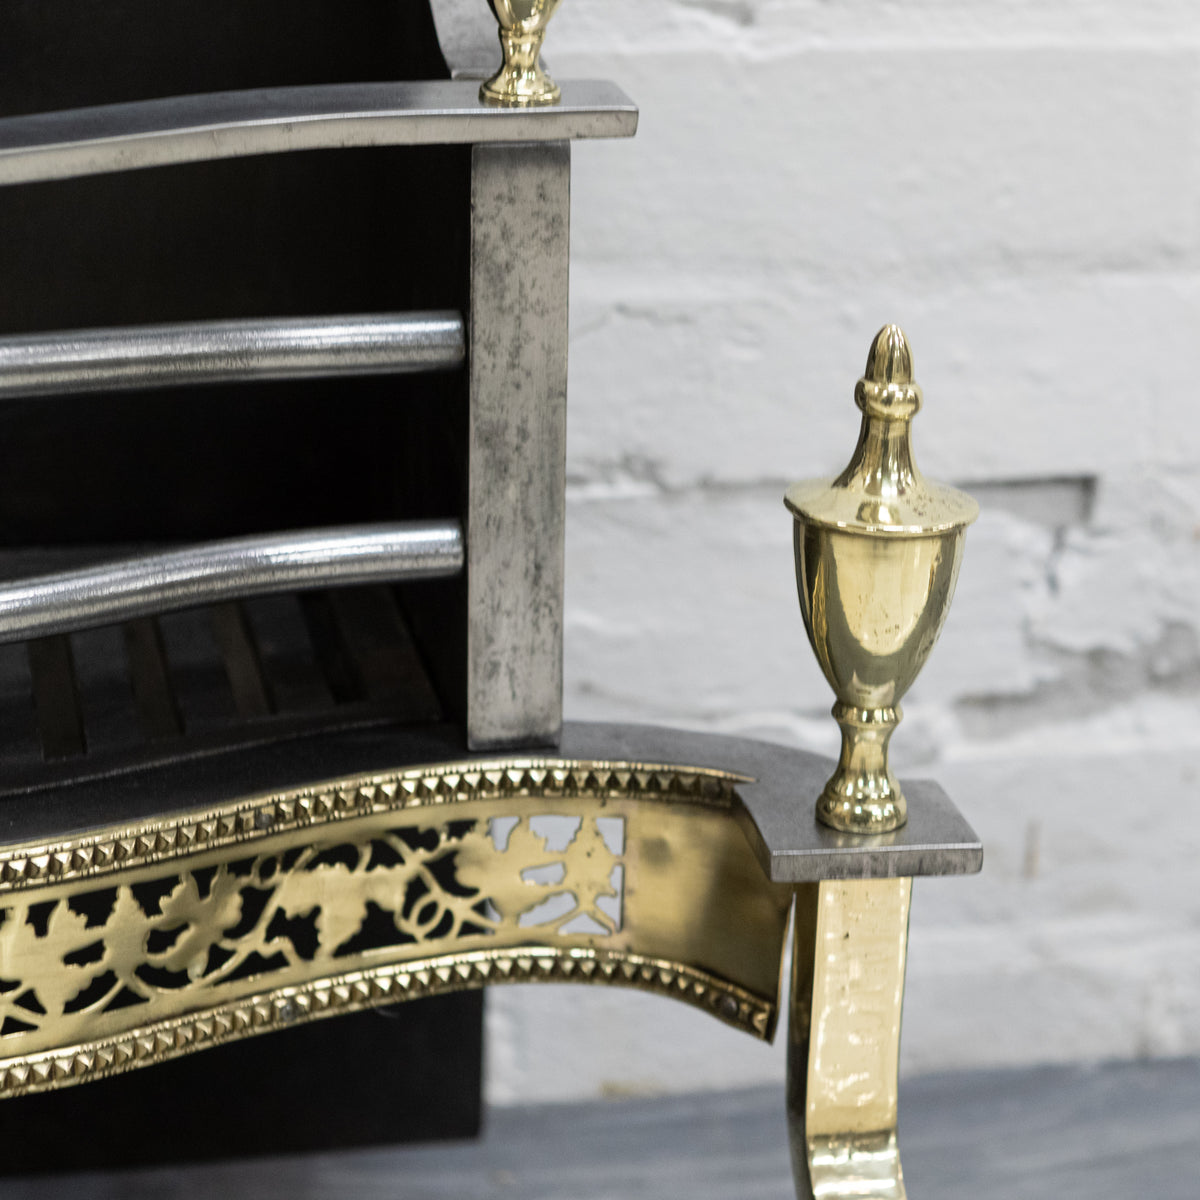 Reclaimed Georgian Style Polished Steel and Brass Fire Basket | The Architectural Forum